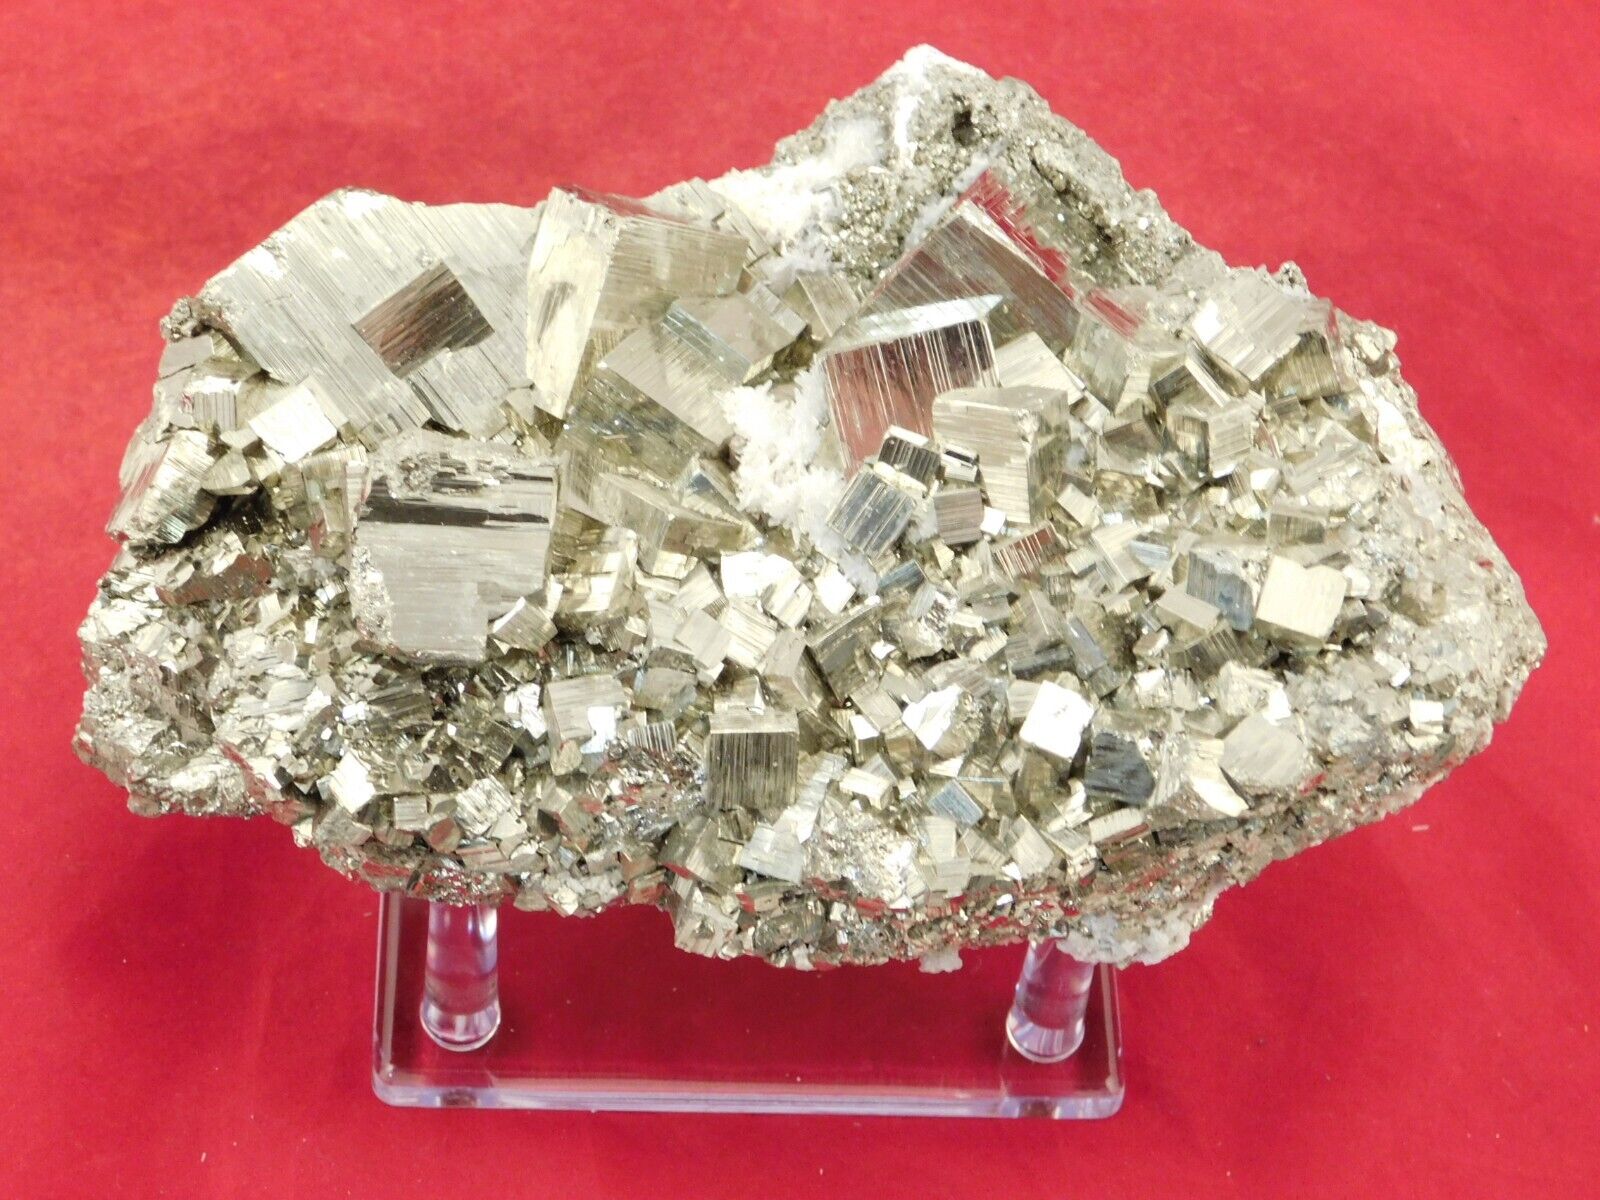 BIG 100% Natural PYRITE Crystal CUBE Cluster From Peru with Stand 1591gr